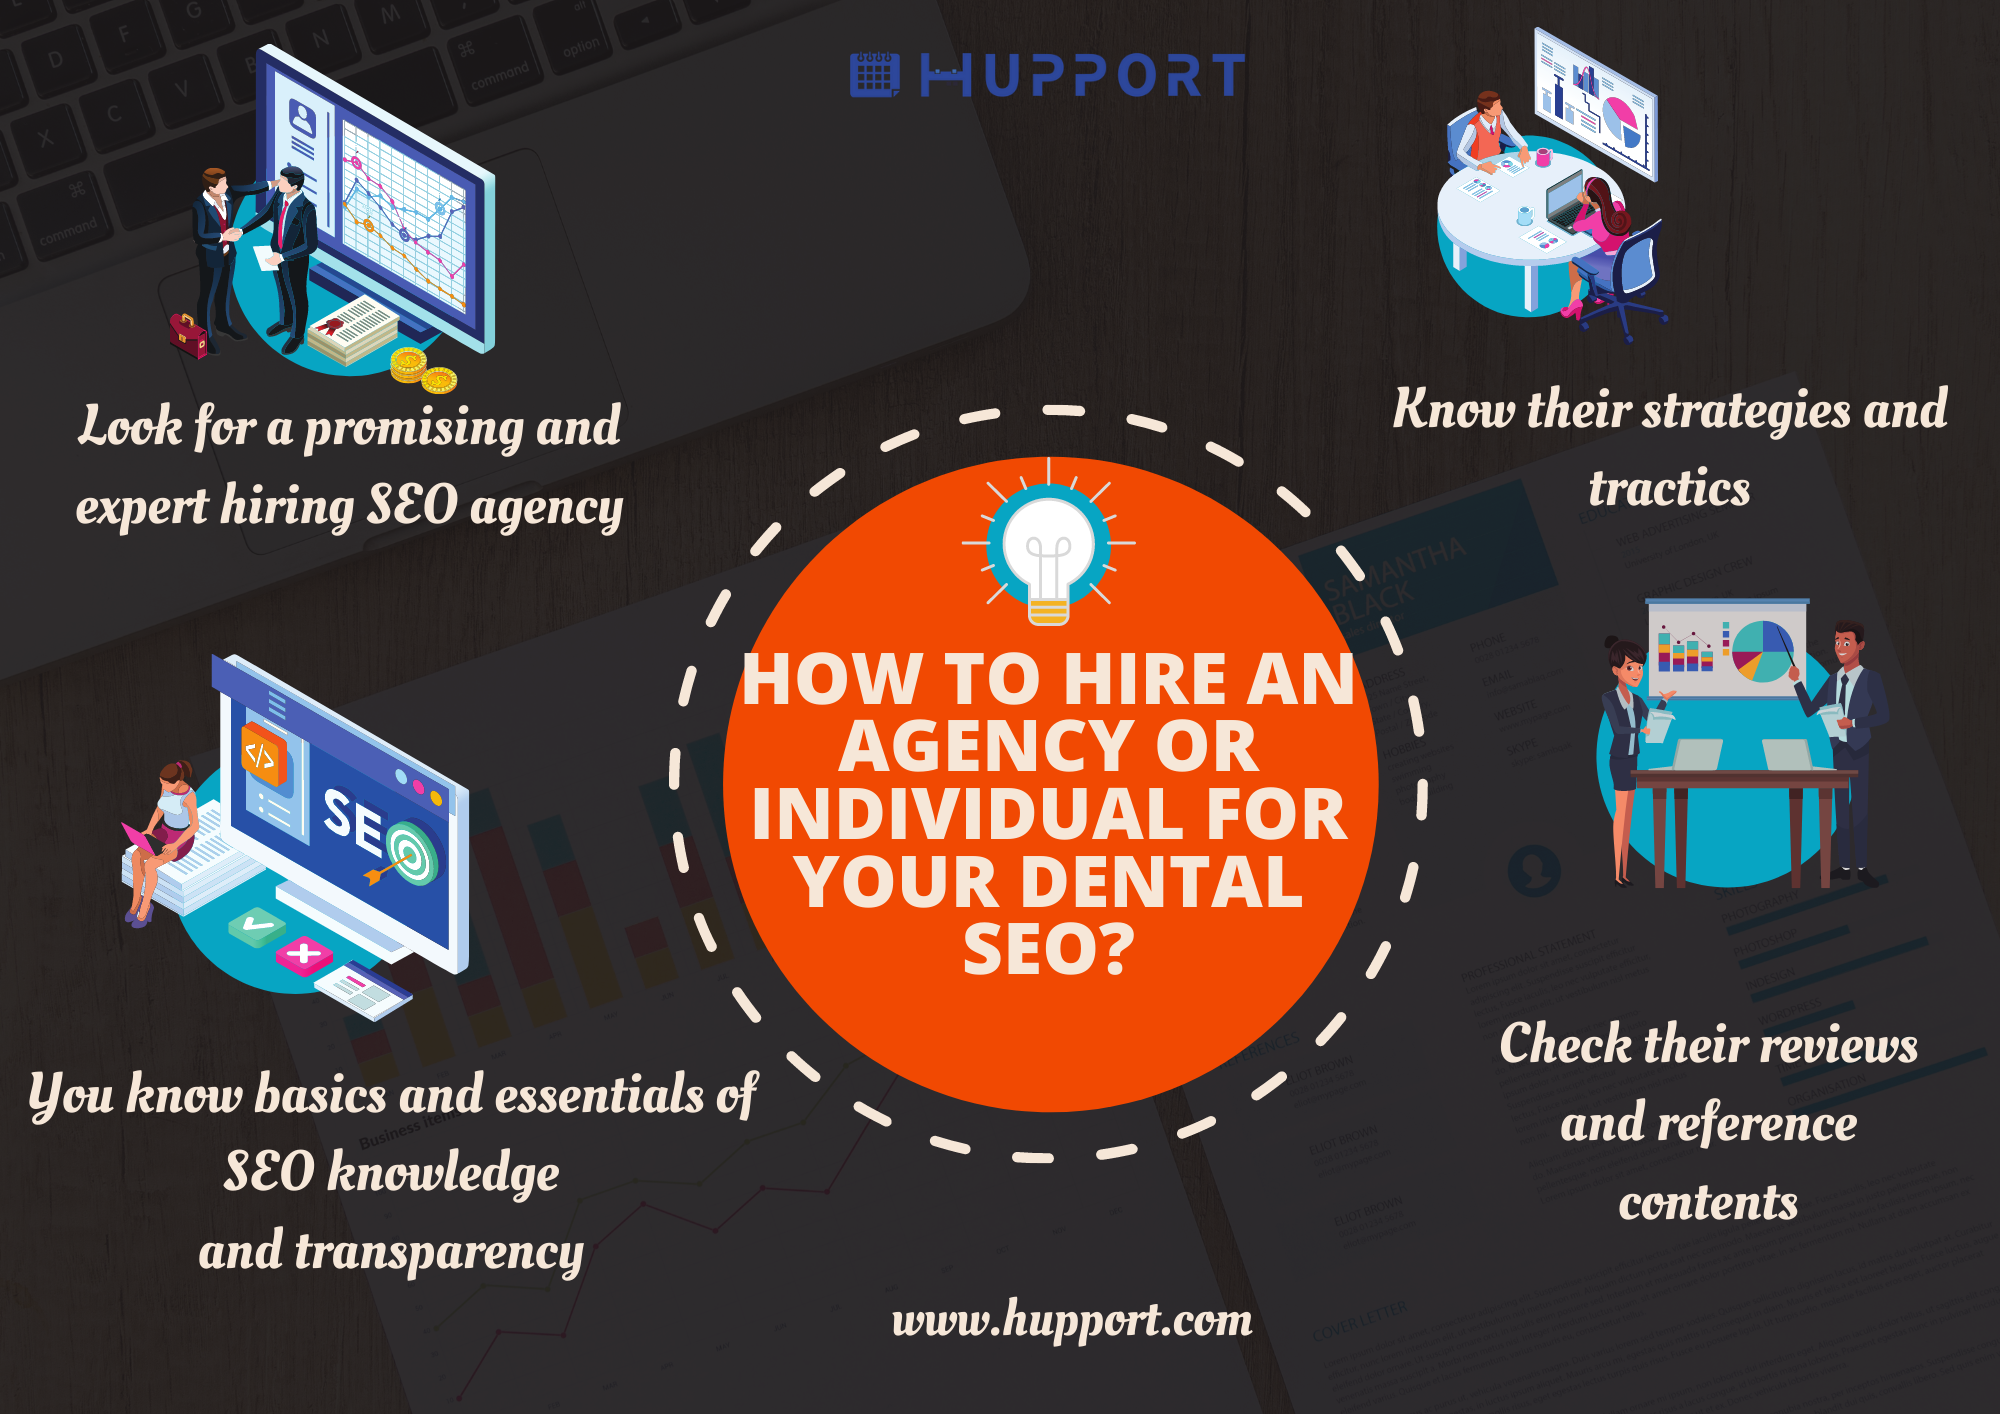 How to hire an agency or individual for your dental SEO?